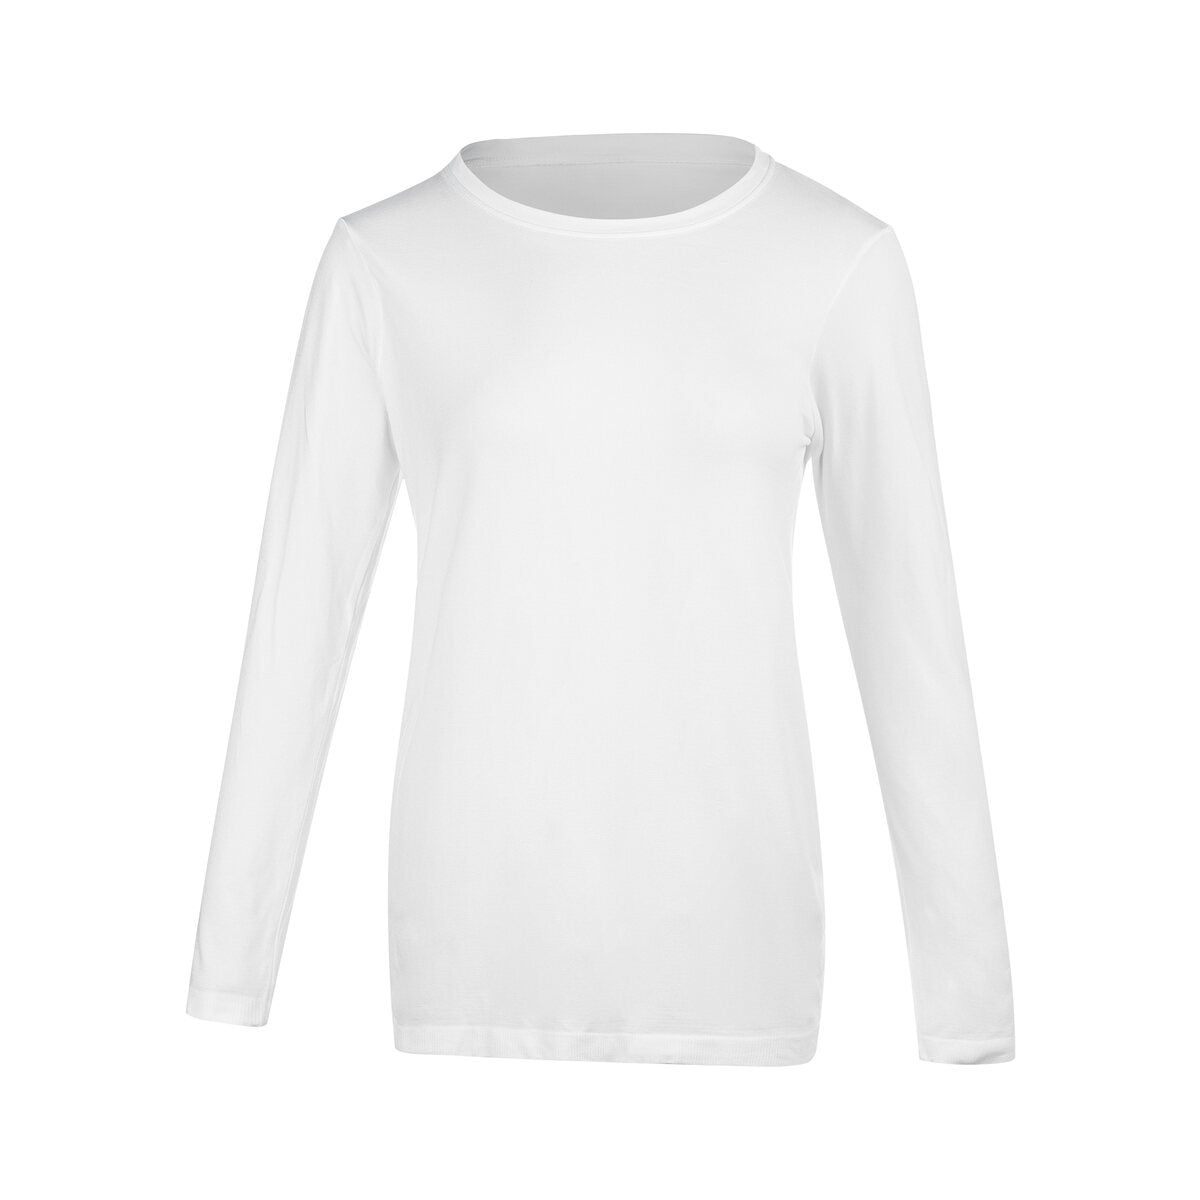 Athlecia Julee Womenswear Loose Fit Long Sleeve Seamless Tee - White 5 Shaws Department Stores